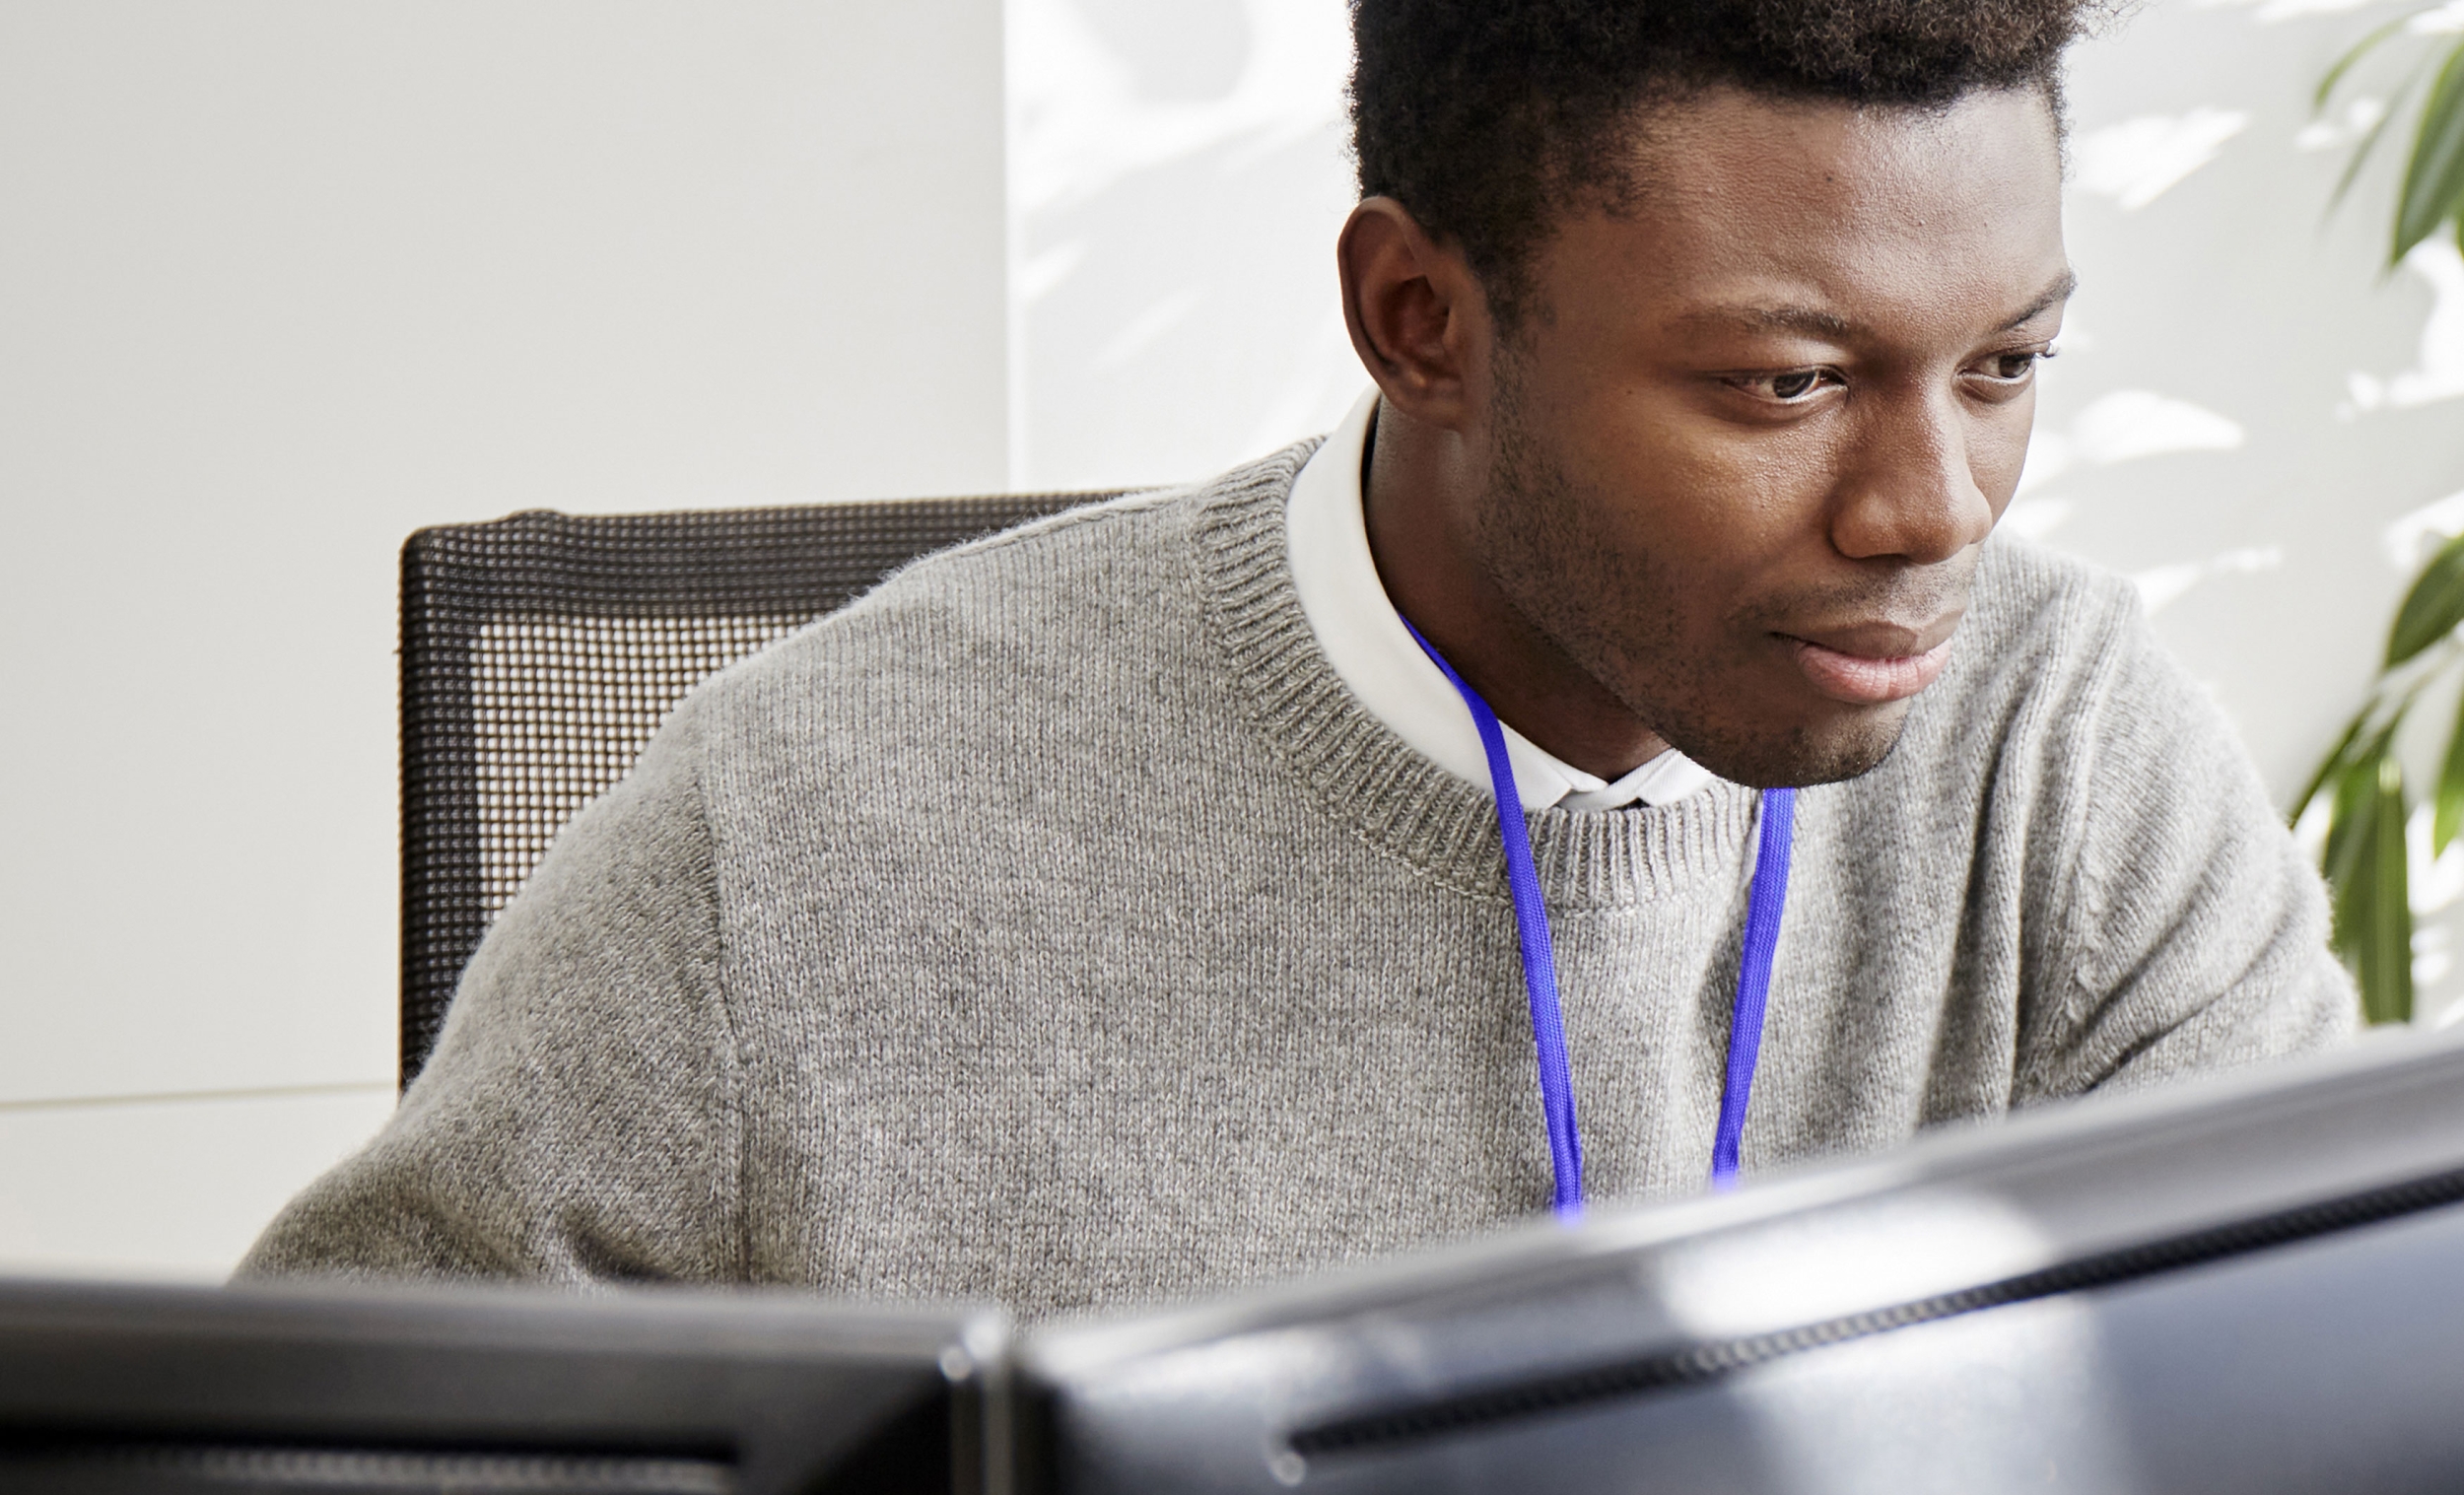 Young black business man wearing a grey jumper and a purple keycord. He is sitting in an office environment and is focused at a double monitor screen in front of him.